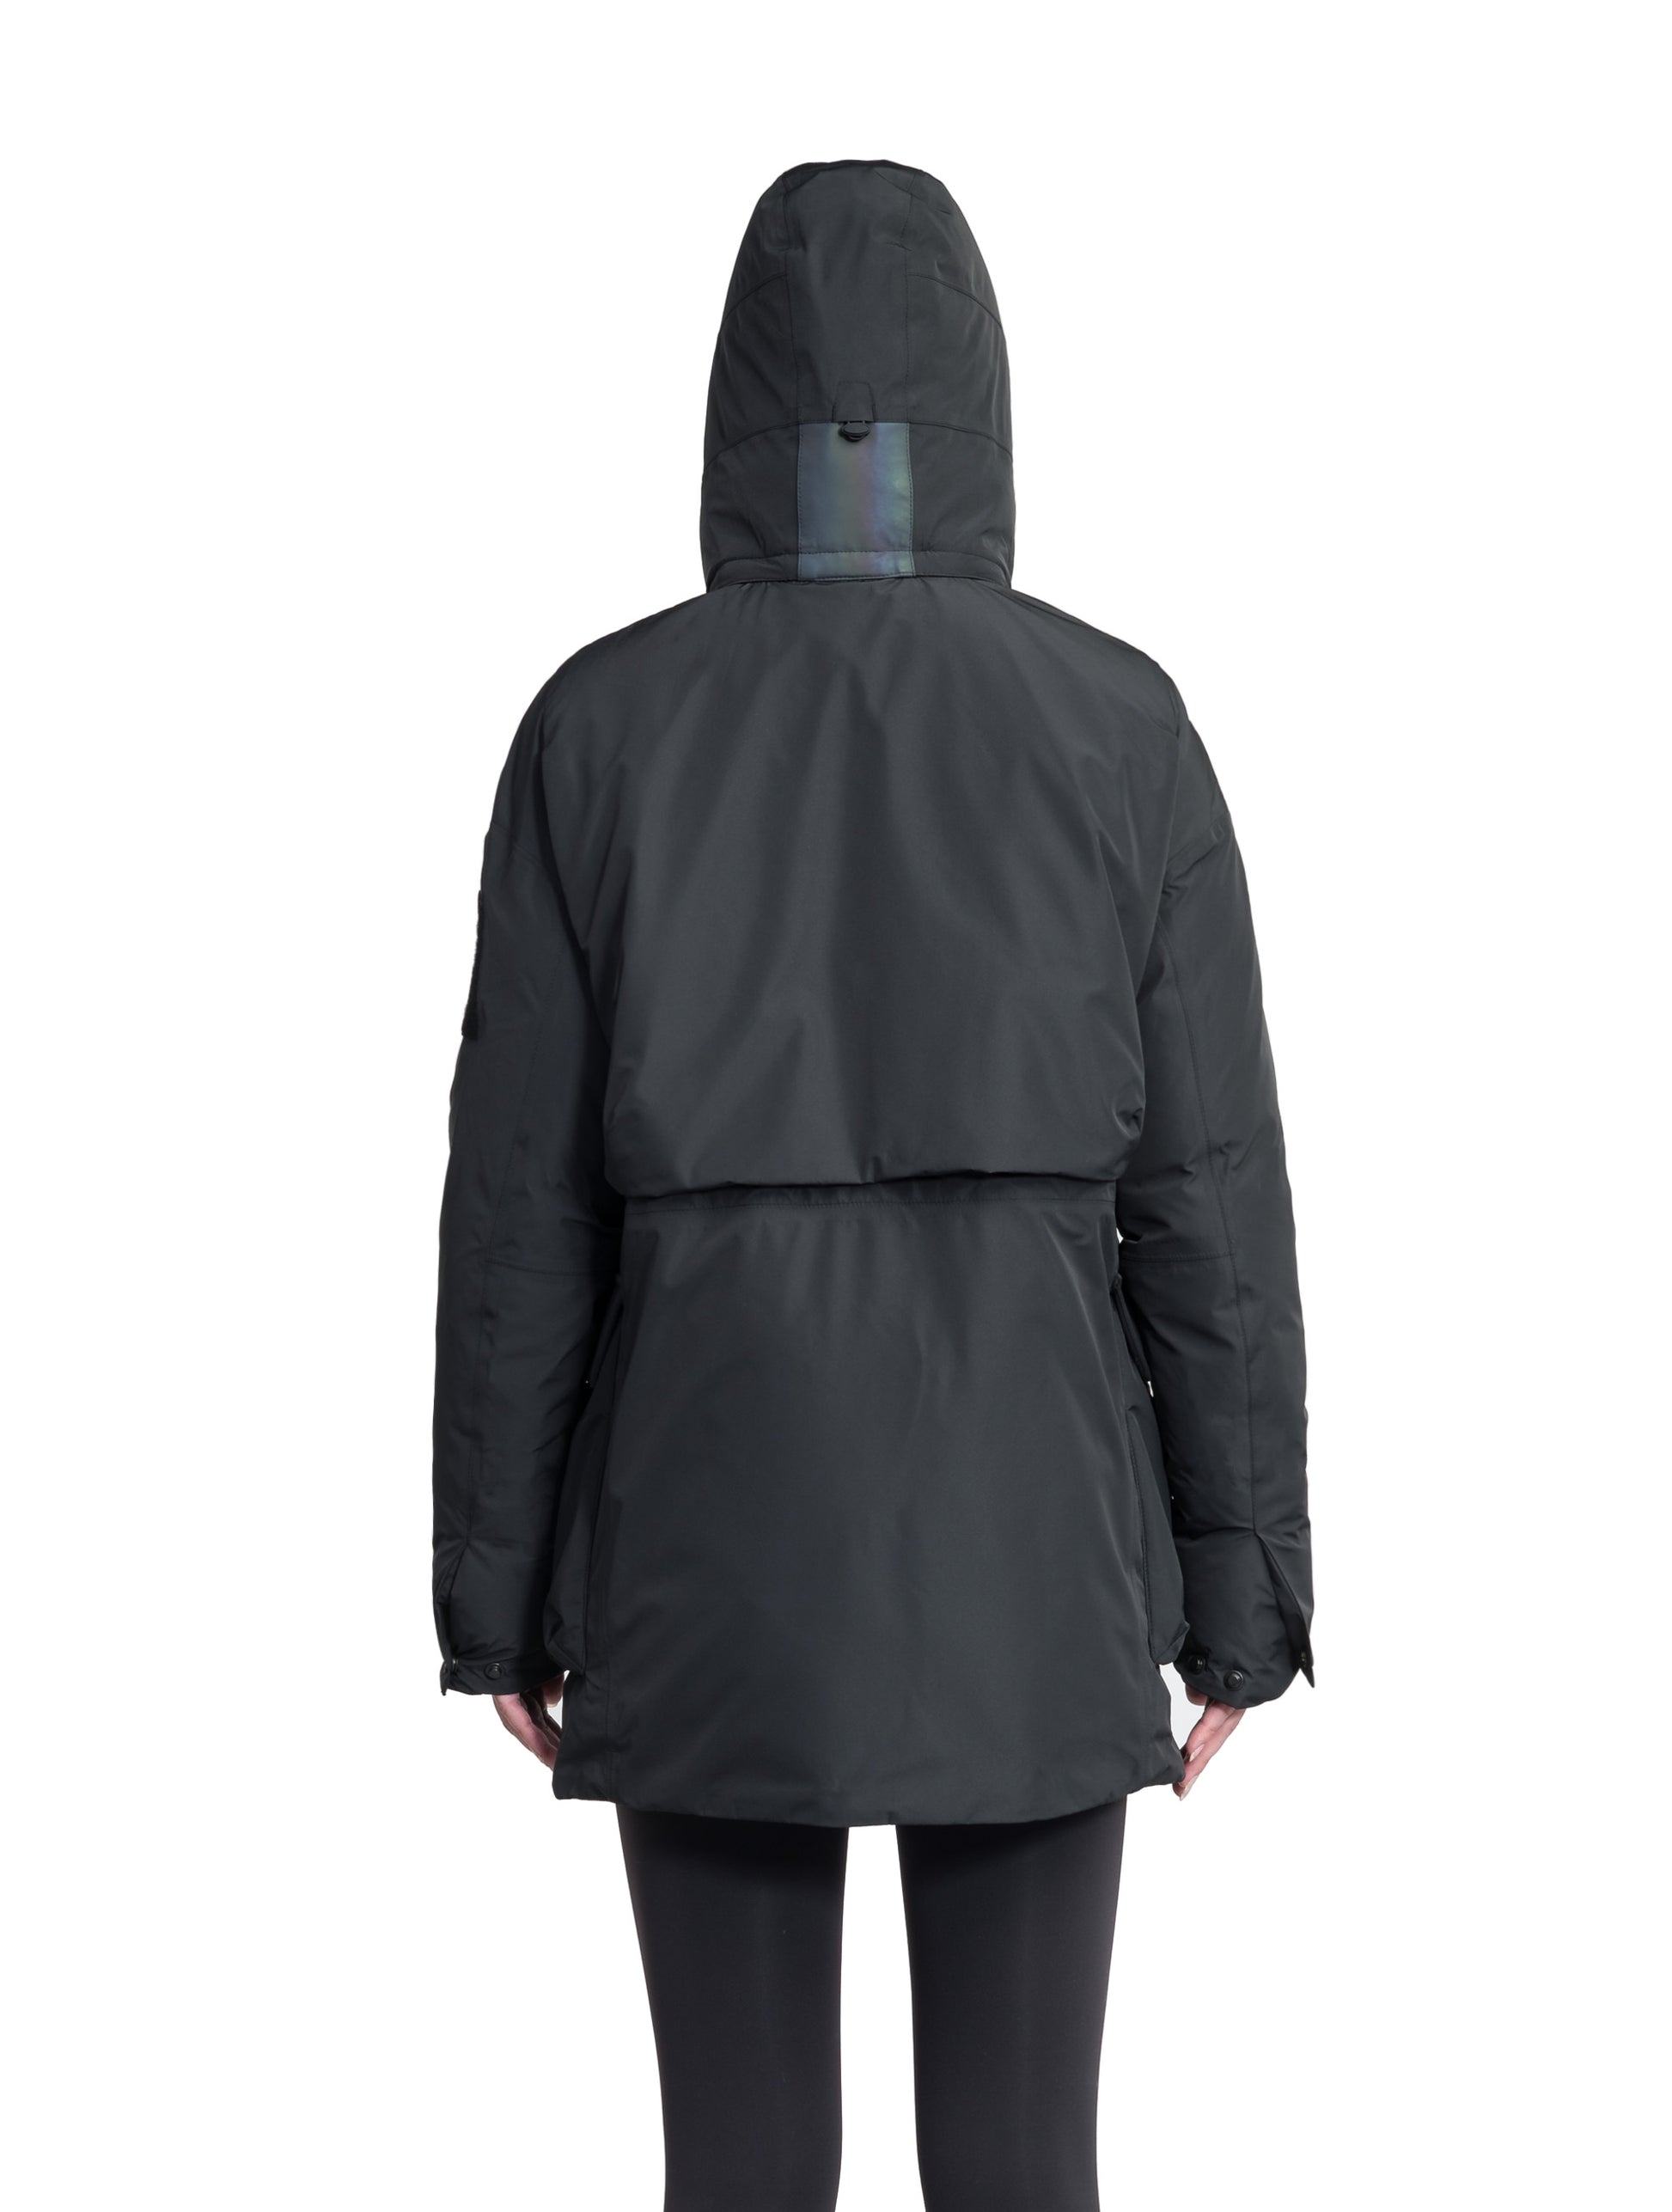 Haelyn Ladies Short Utility Parka in thigh length, 3-Ply Micro Denier fabrication, Premium Canadian White Duck Down insulation, removable down-filled hood, two-way centre front zipper, hidden adjustable cord at waist, adjustable snap cuffs, and four exterior patch pockets at front, in Black